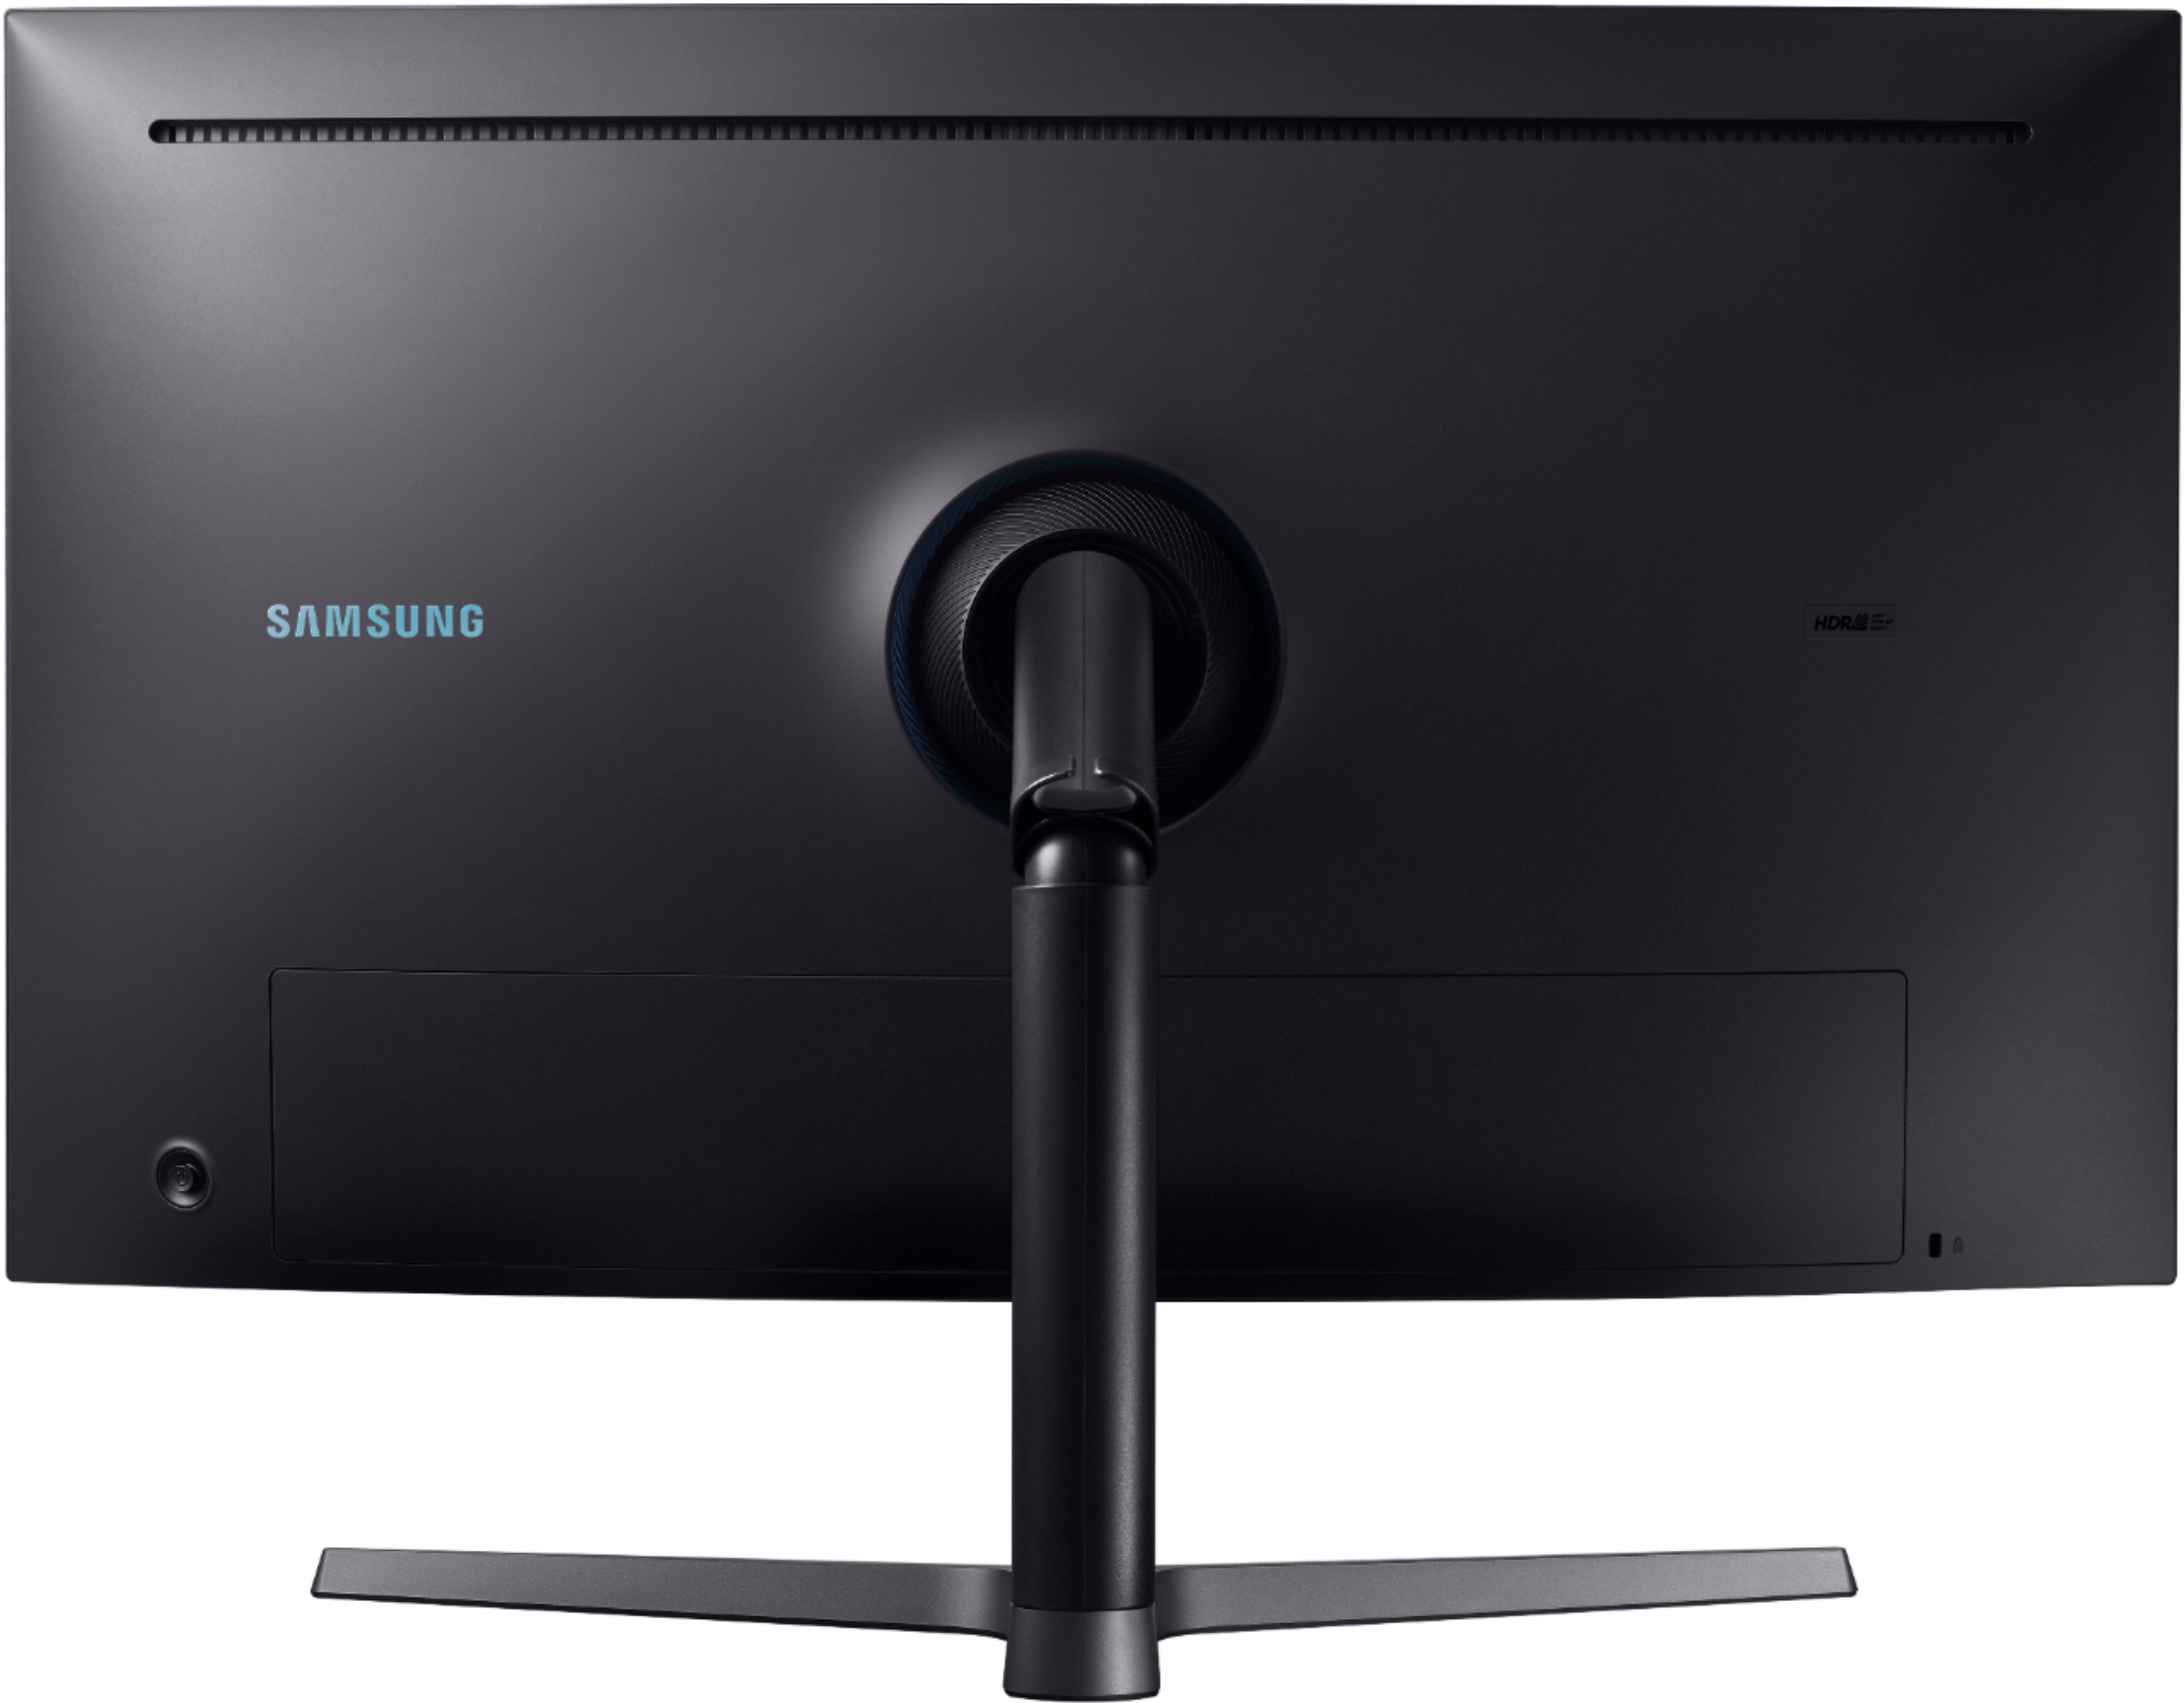 Back View: Samsung - Geek Squad Certified Refurbished 27" LED Curved QHD FreeSync Monitor with HDR - Matte Dark Blue/Black